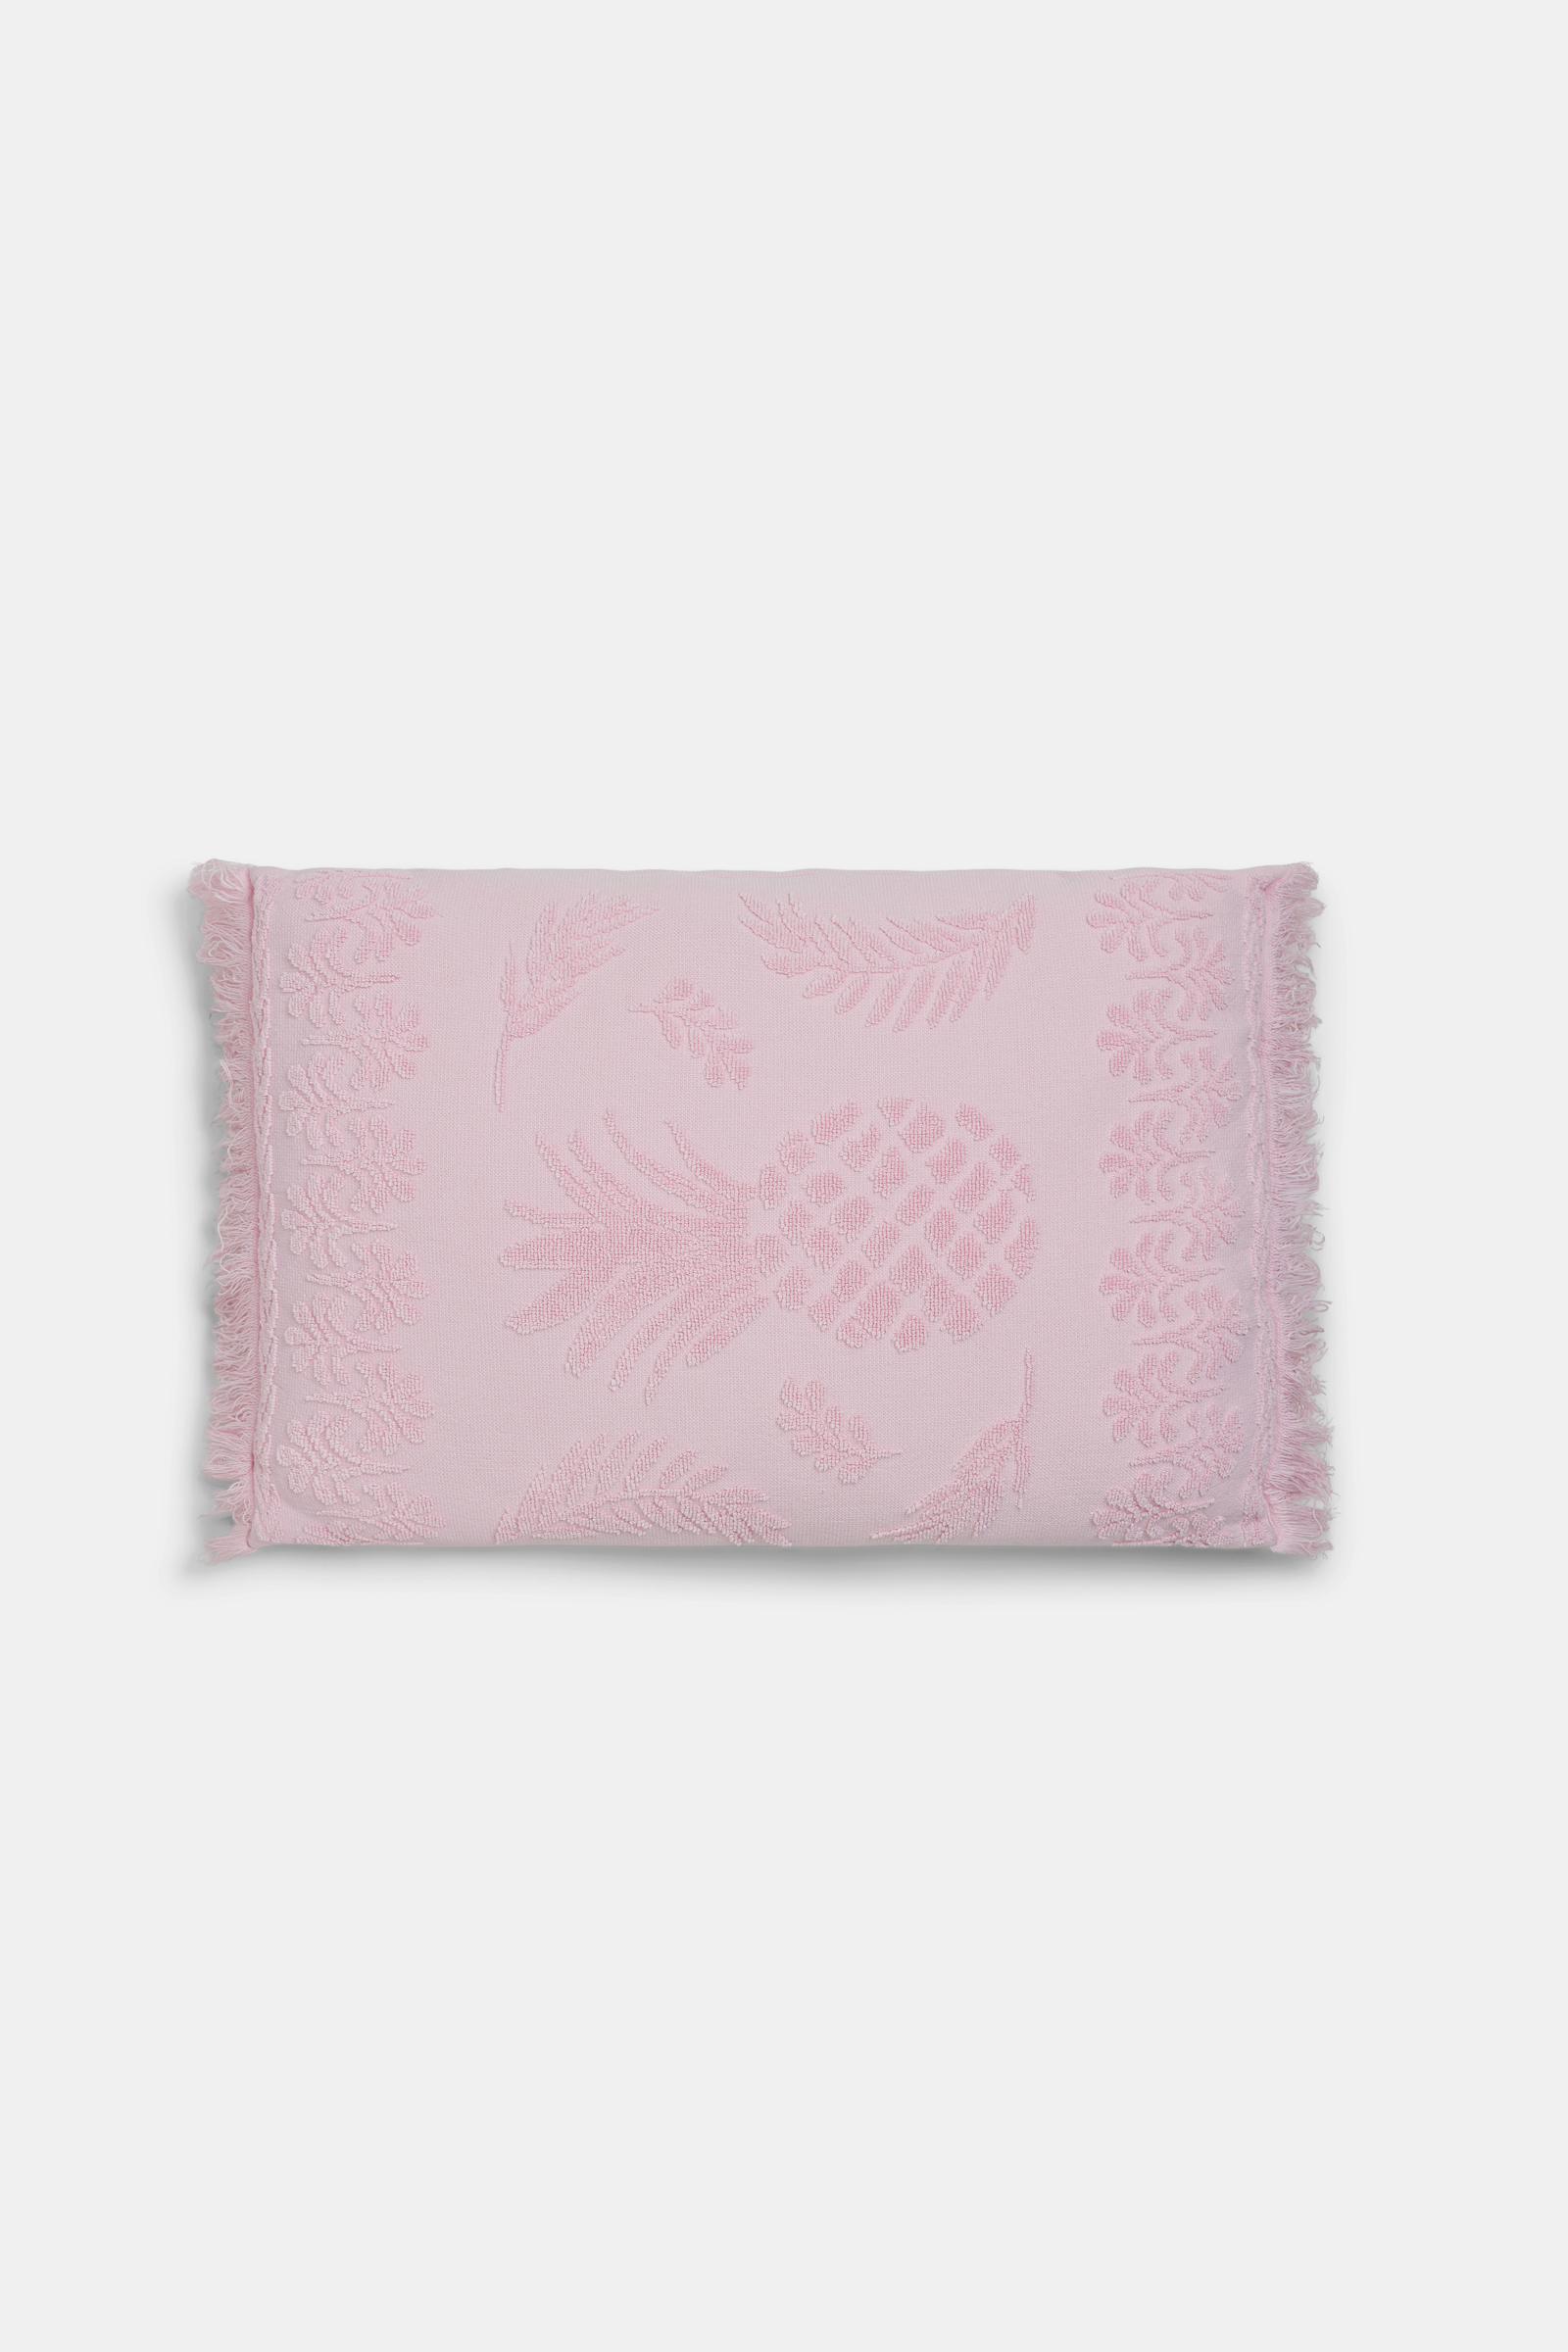 Dorothee Schumacher Cotton pillow with woven jacquard pineapple pattern pink